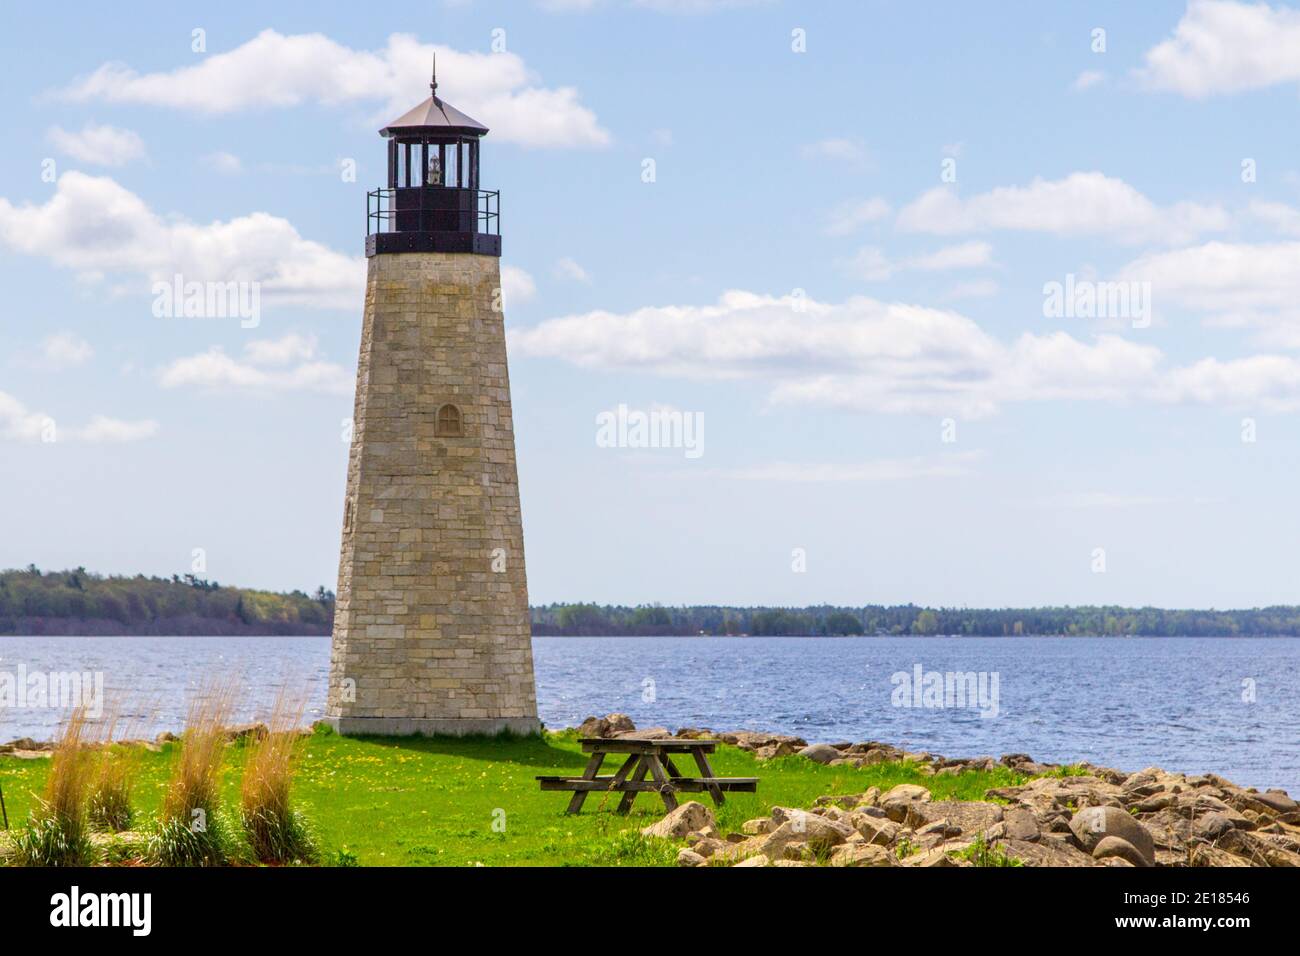 Lake Michigan Lighthouse. Lighthouse on the coast of Lake Michigan in Gladstone, Michigan. Gladstone is a small town located in the Upper Peninsula. Stock Photo